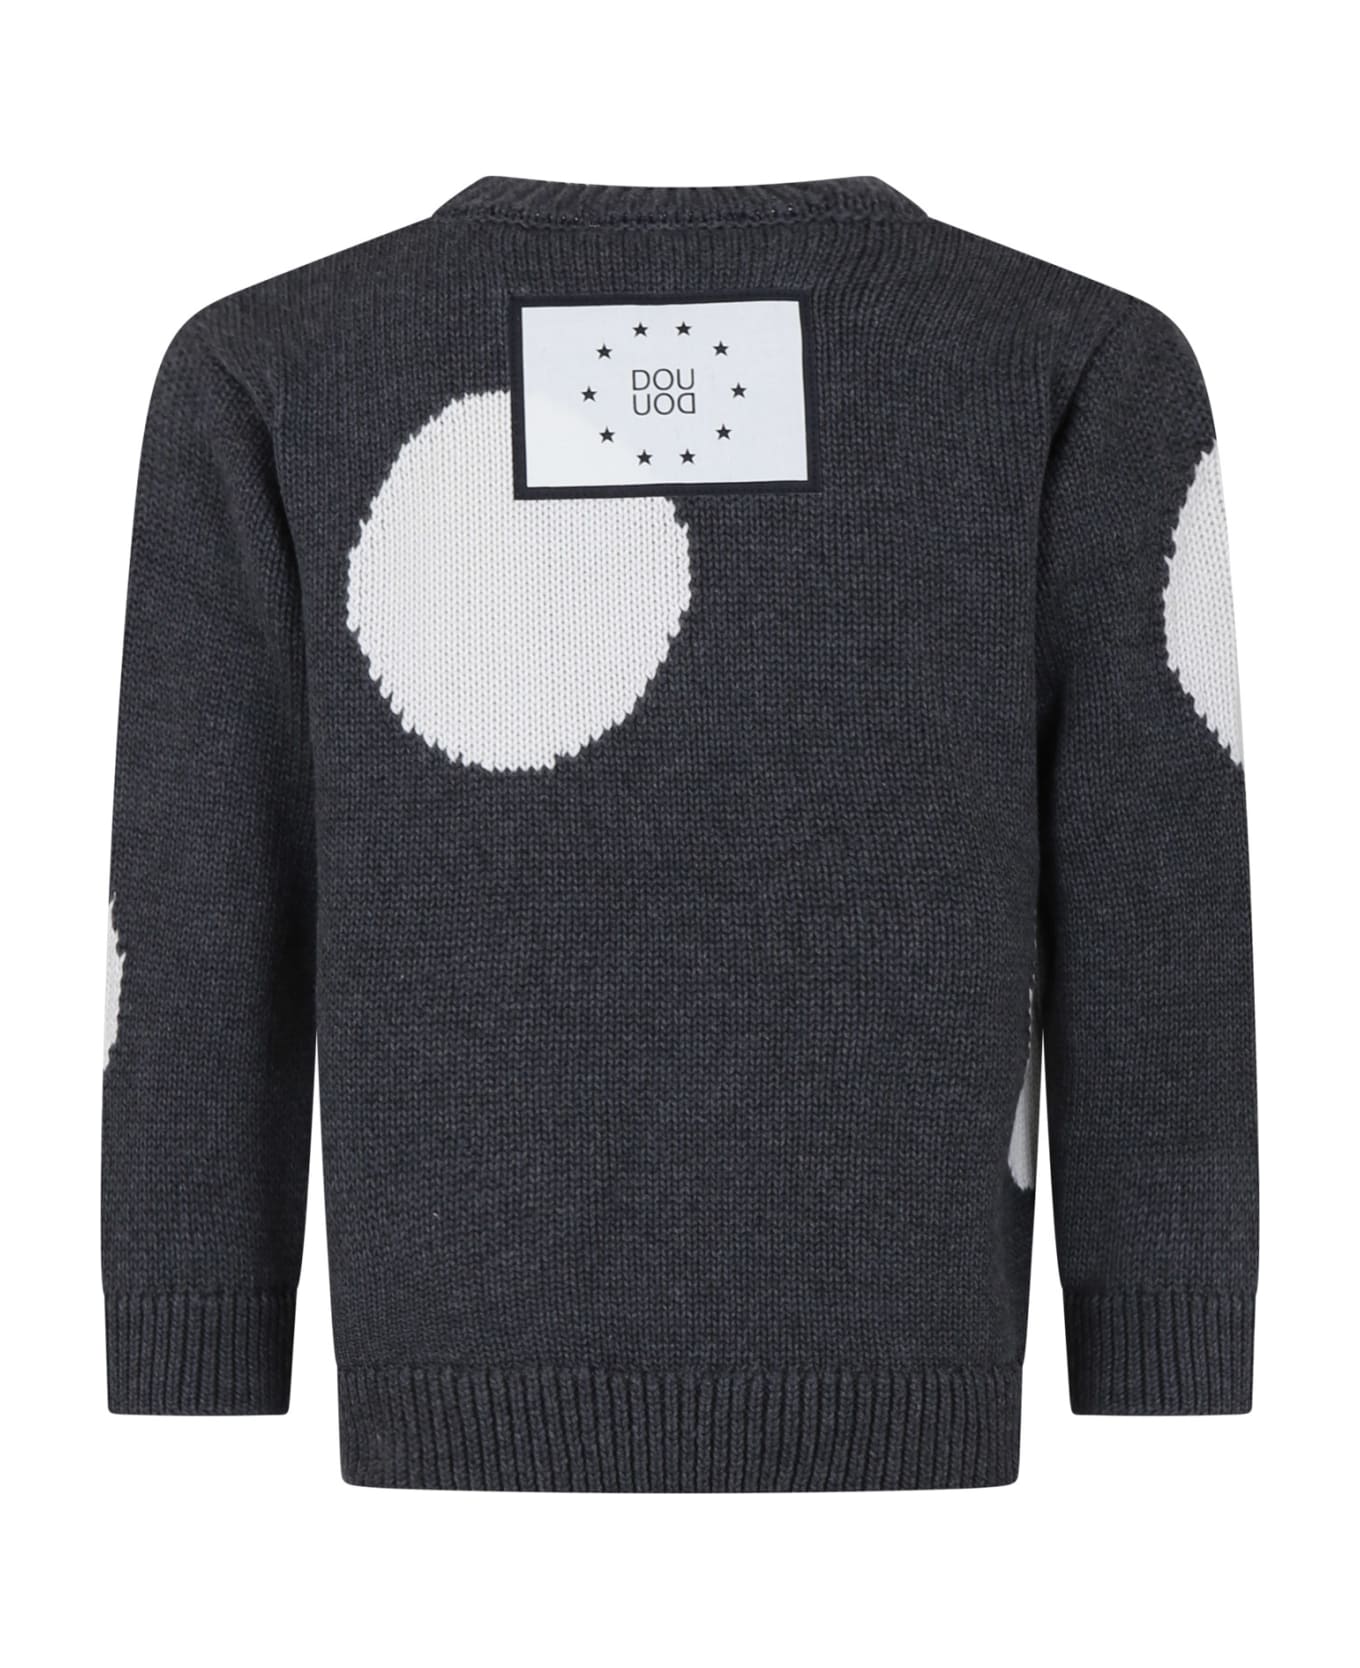 Douuod Gray Sweater For Girl With White Polka Dots - Grey